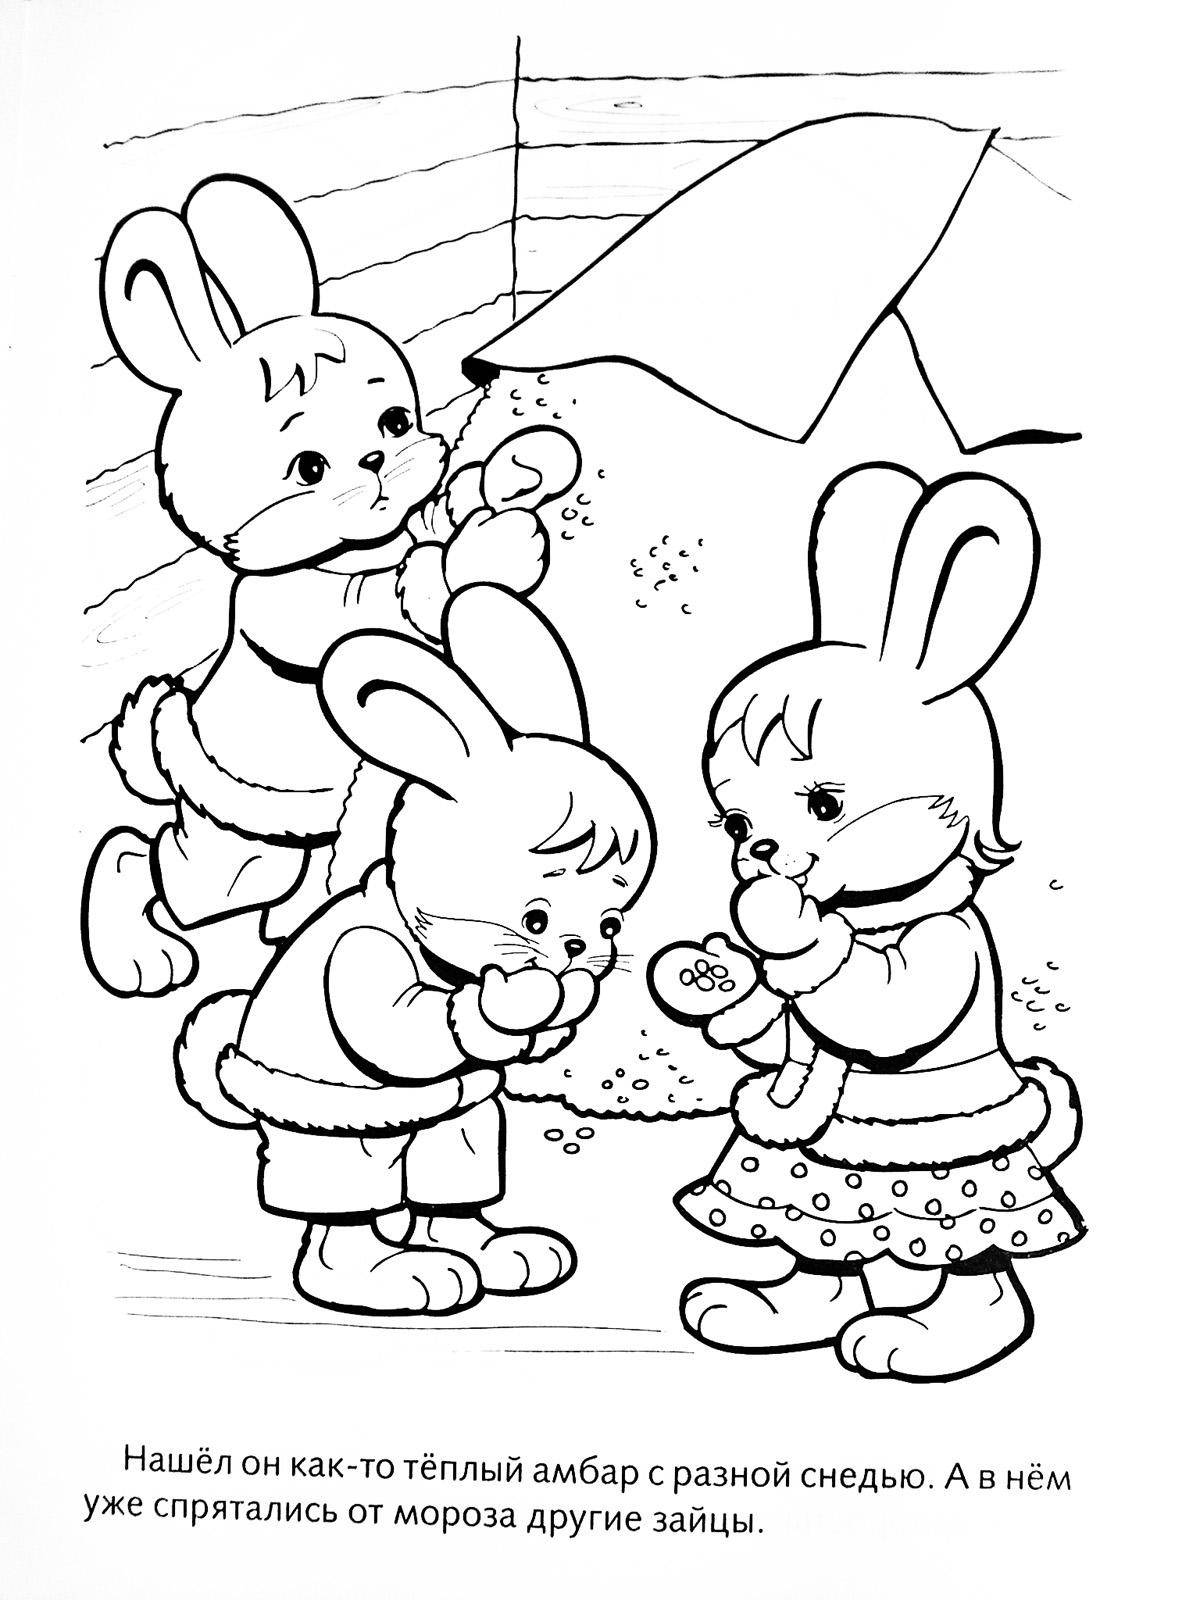 Coloring Figure eating bunnies. Category Pets allowed. Tags:  hare, rabbit.